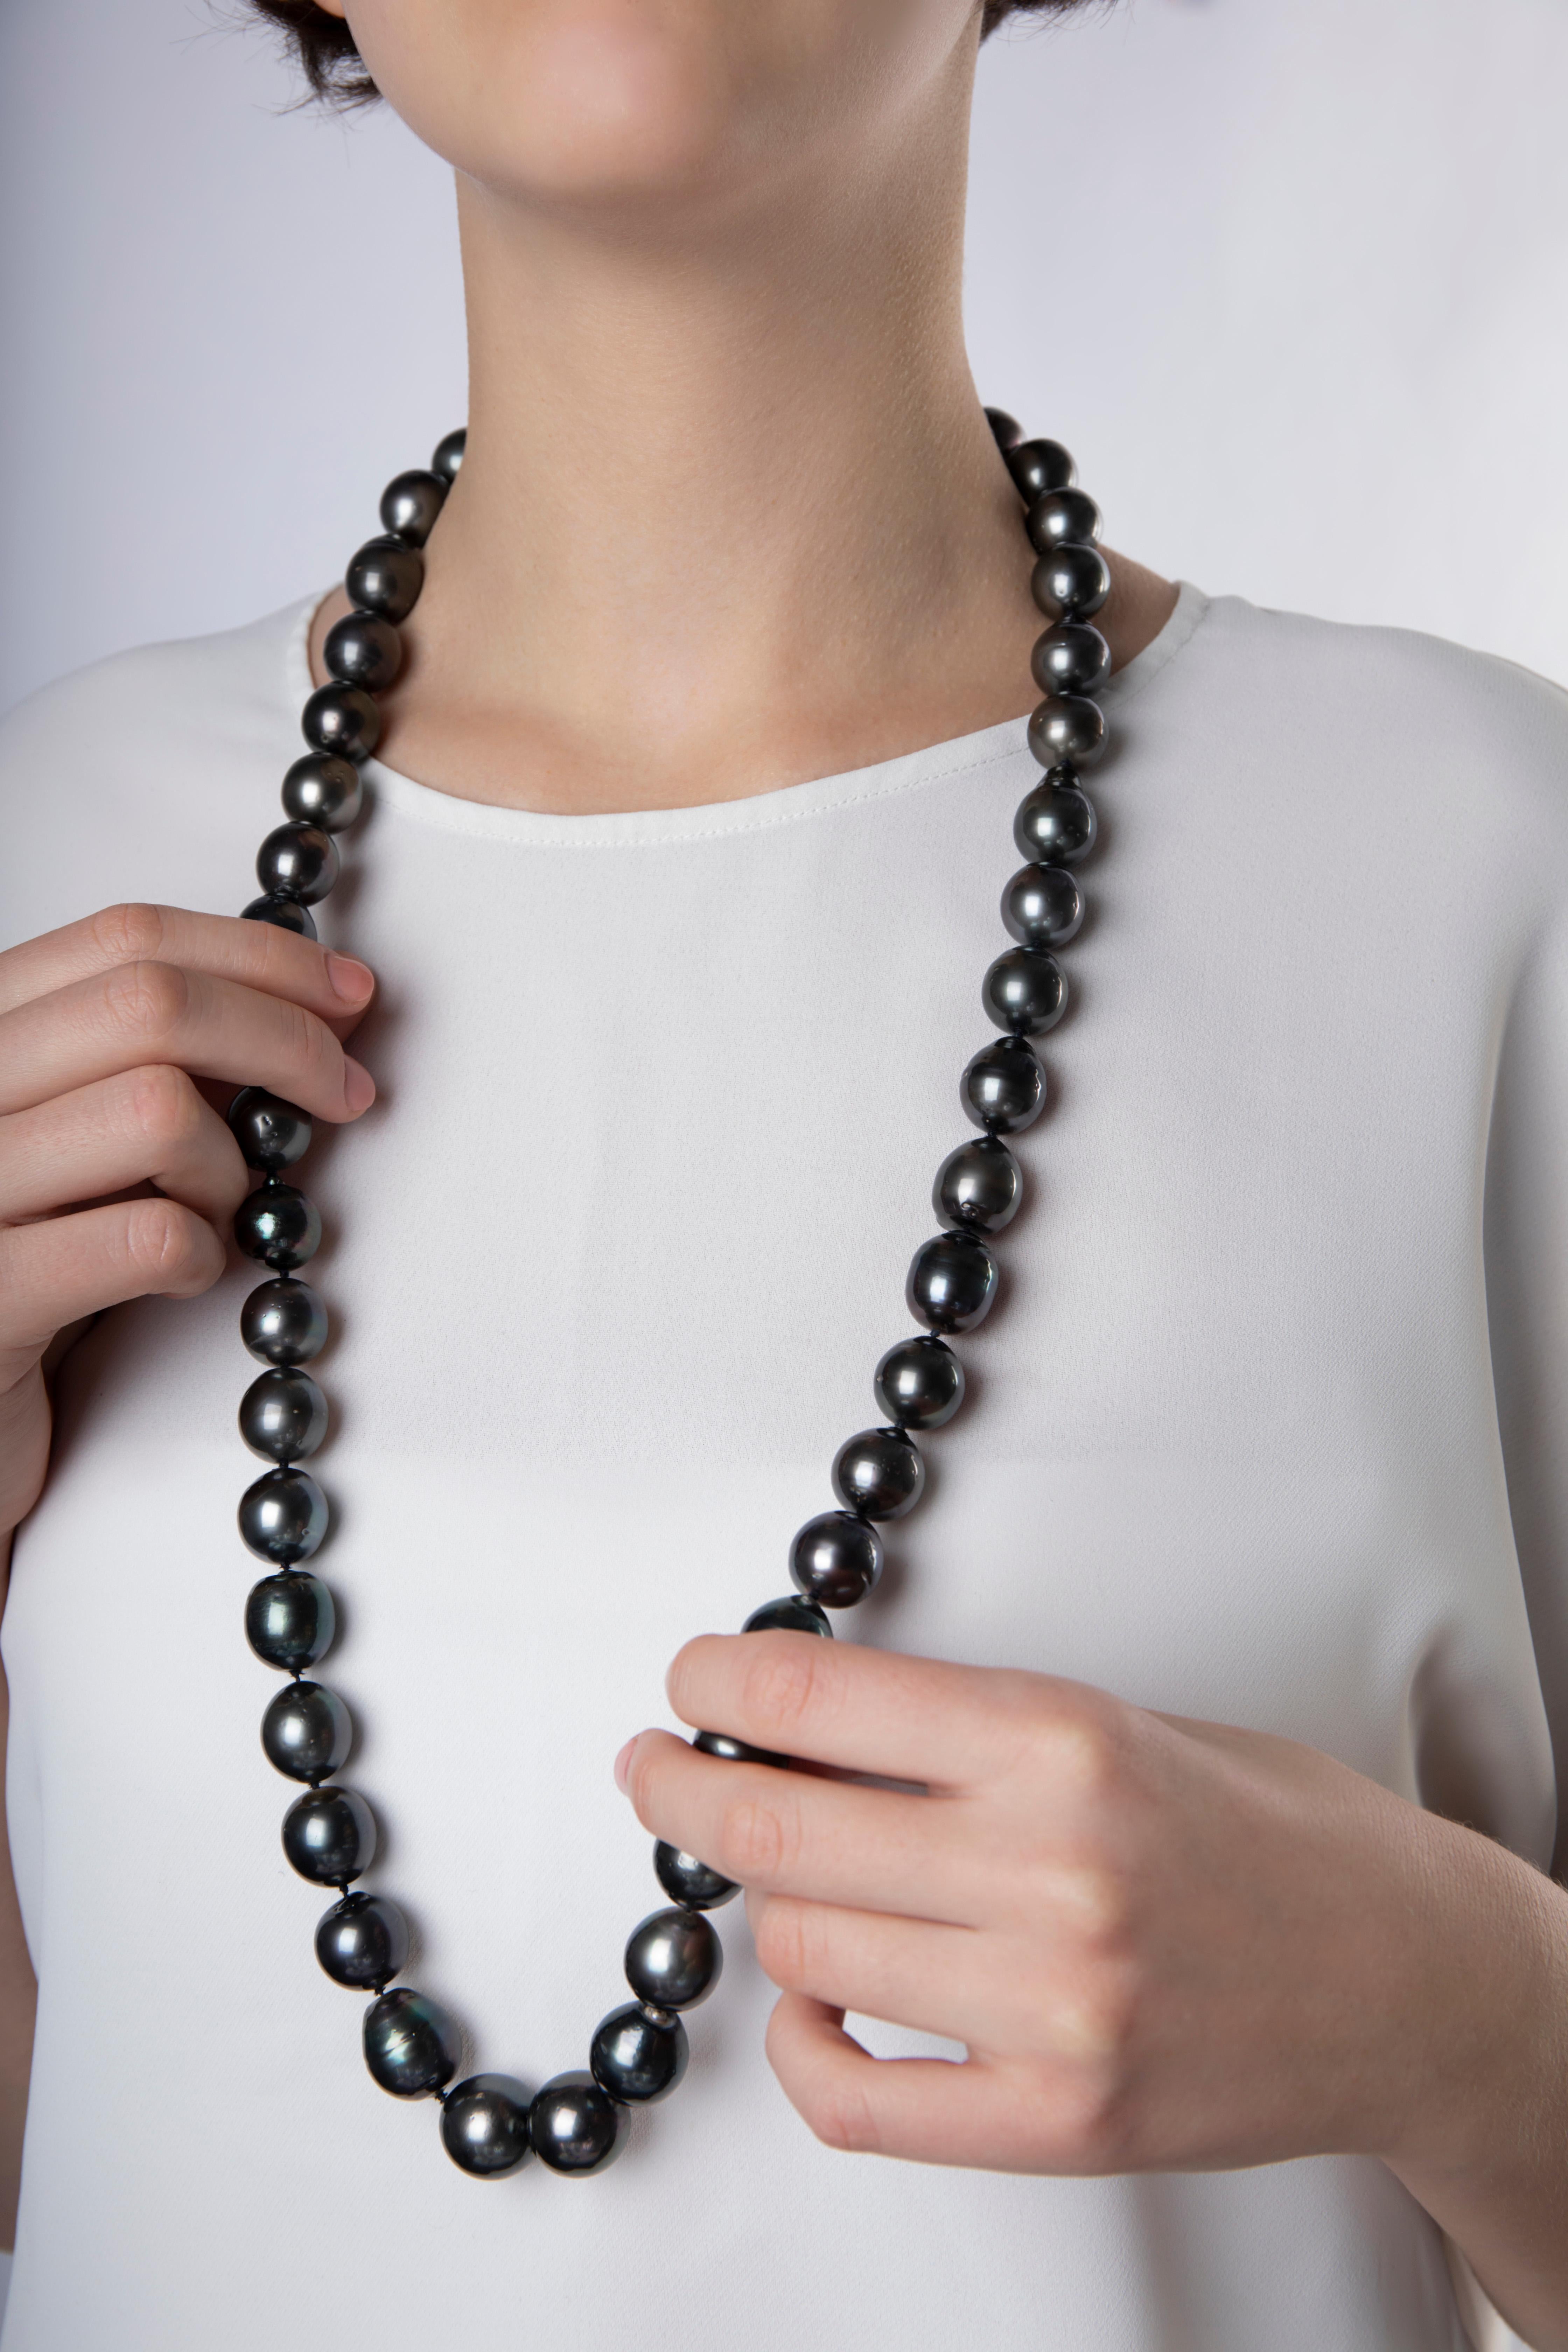 Comprised of timeless, jewellery box staples, our Classic collection is designed to last through the generations. Featuring baroque-shaped Tahitian pearls in deep grey-black tones, secured to an 18ct gold clasp, this long necklace is both